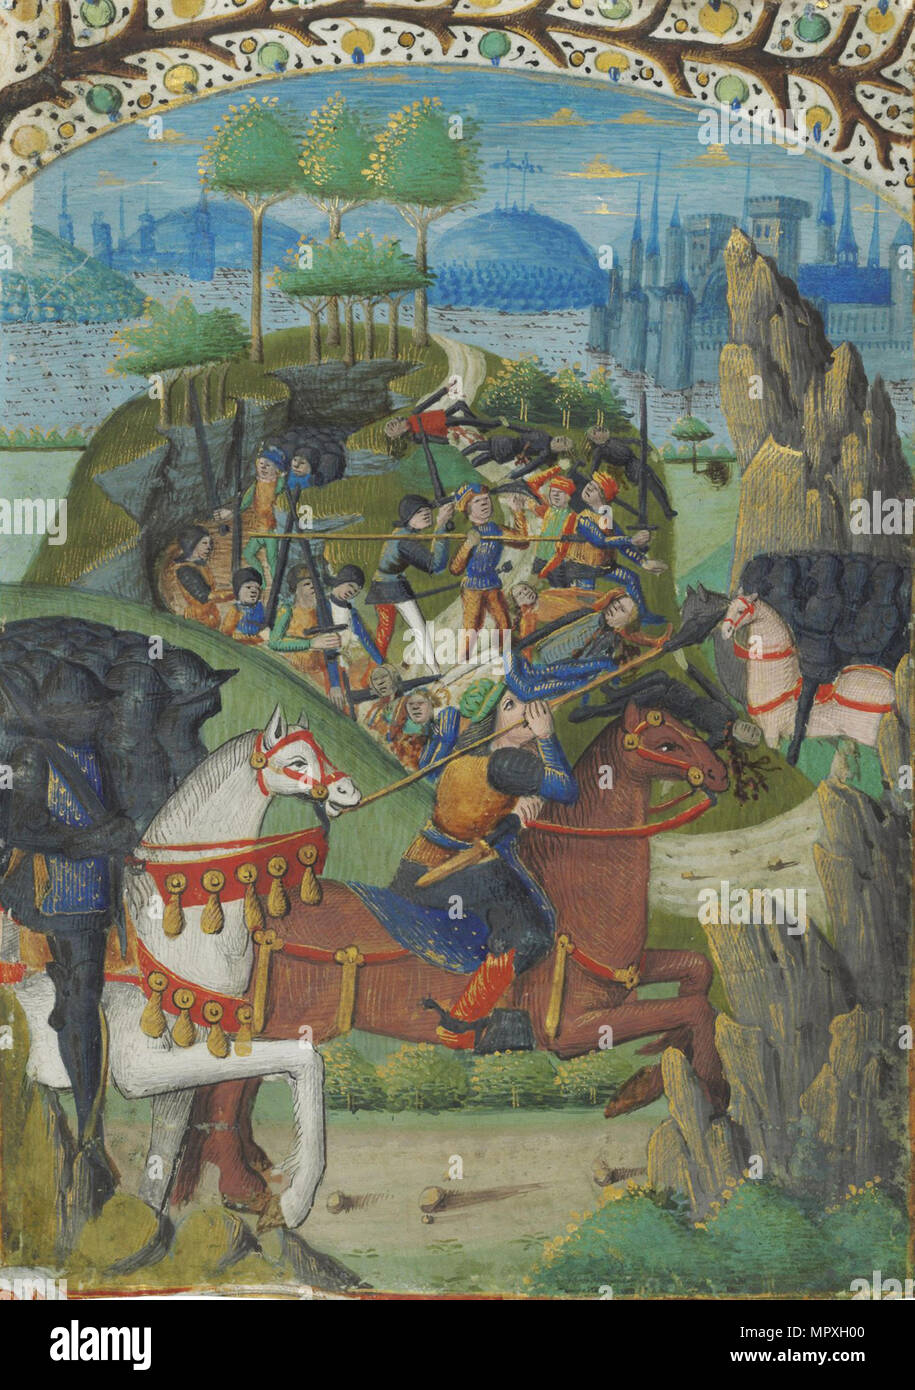 Hannibal defeated the Romans. From the Romuléon, c. 1480. Stock Photo